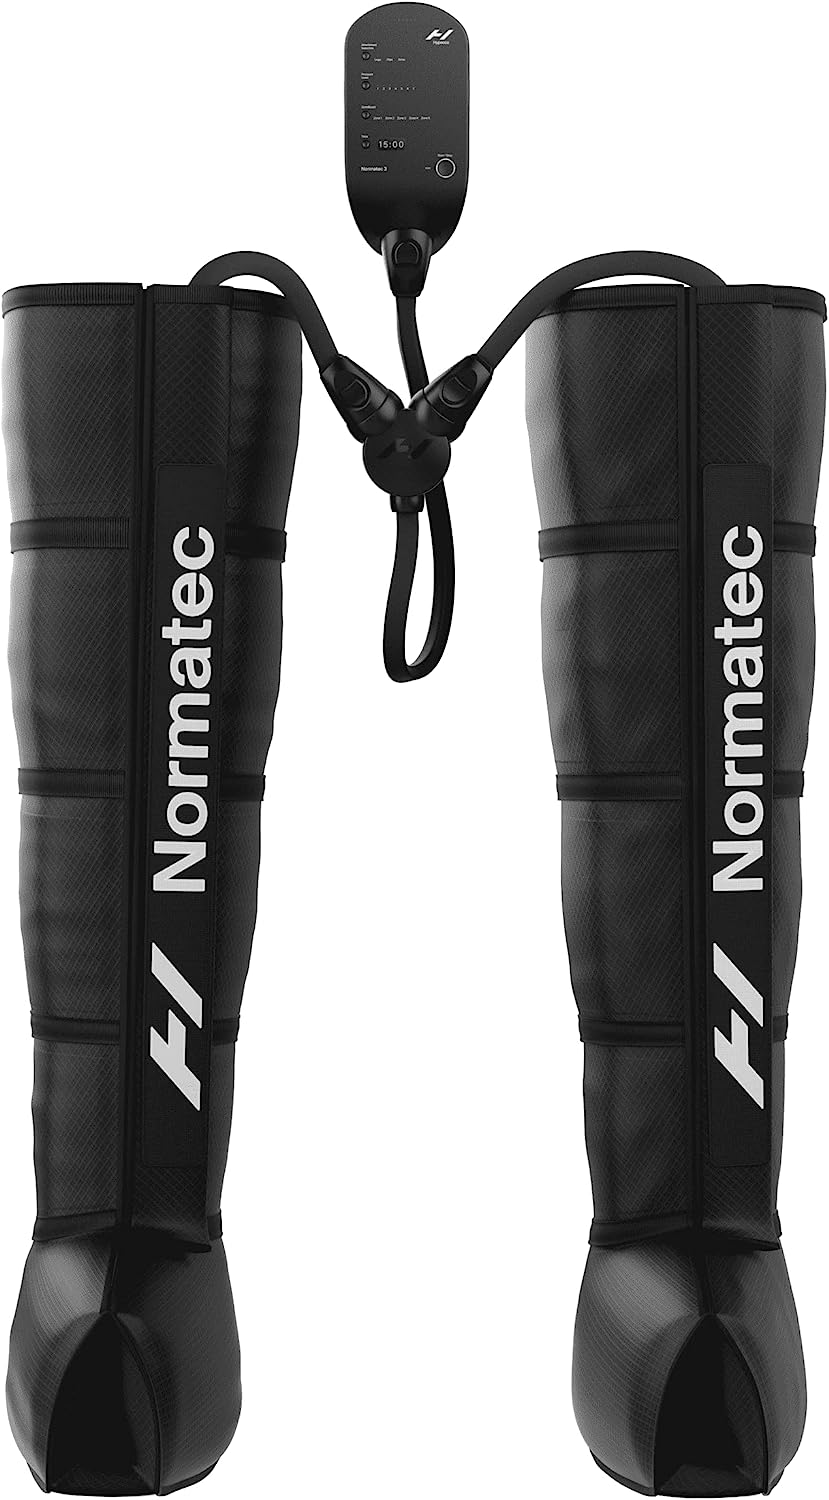 Featured Image for Hyperice Normatec 3 – Recovery System with Patented Dynamic Compression Massage Technology (Normatec 3 Standard Size Legs) FSA-HSA Approved